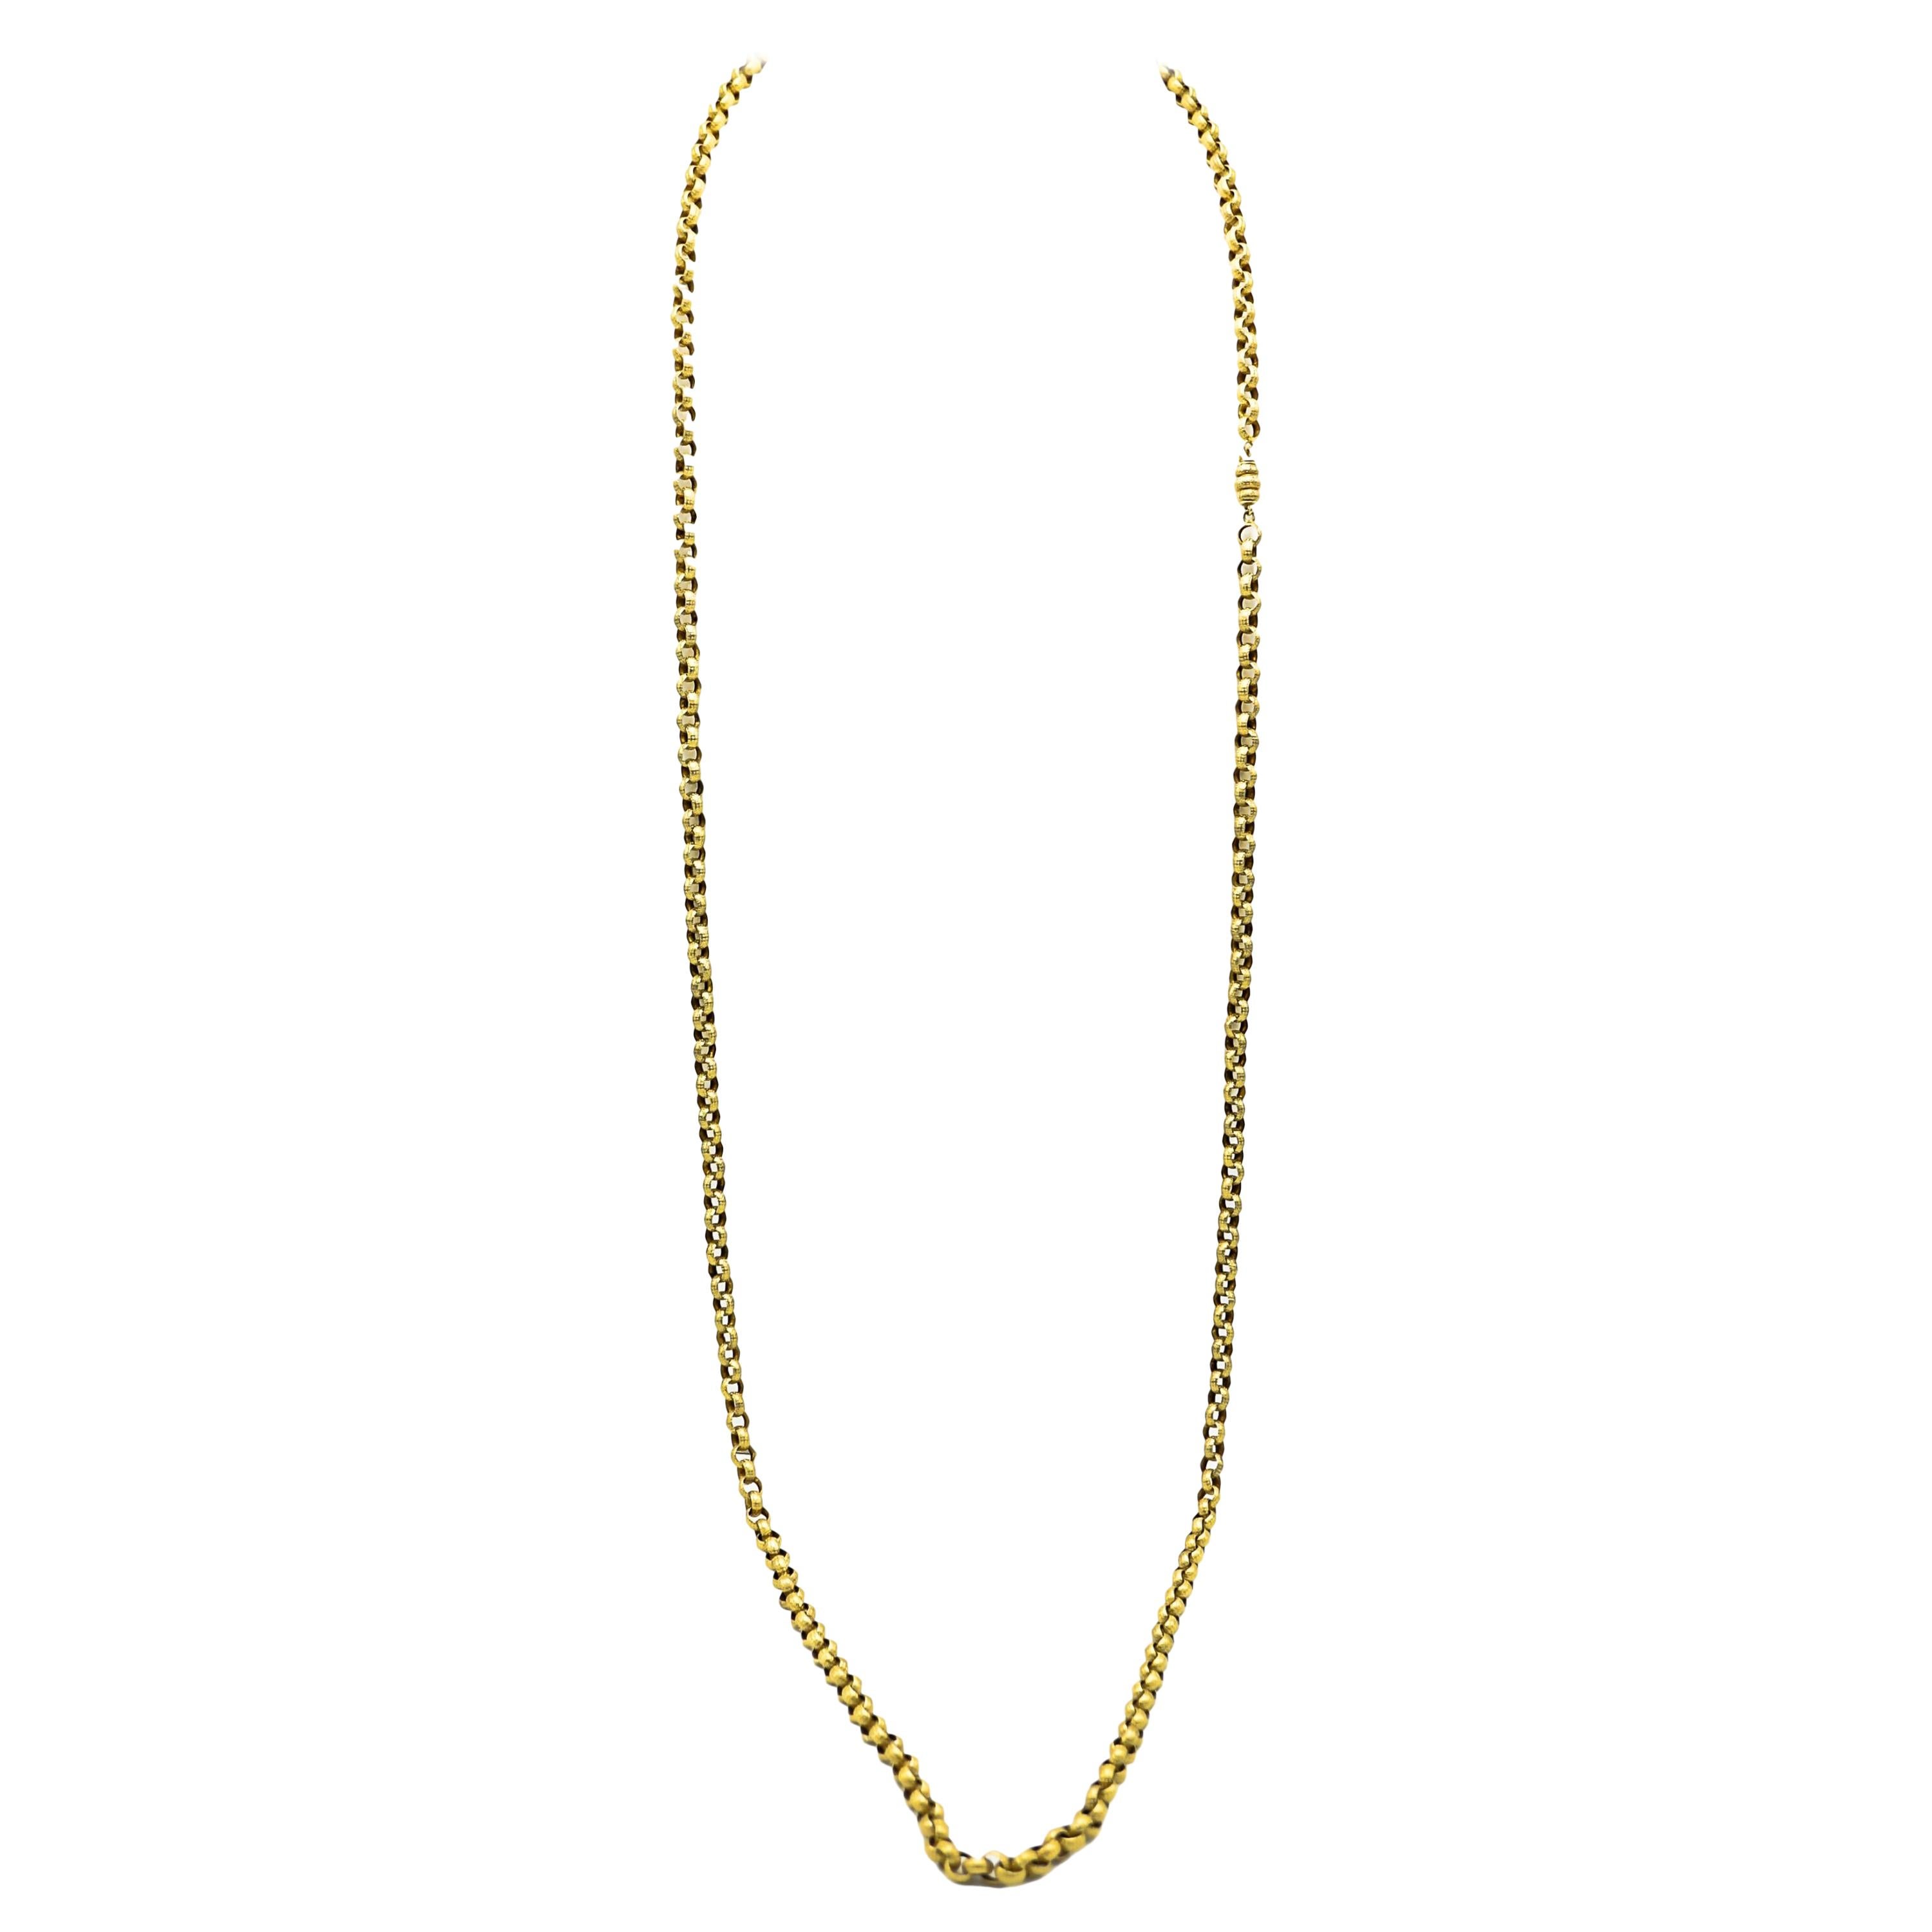 Victorian Period 15 Karat Gold Extended Chain or Necklace